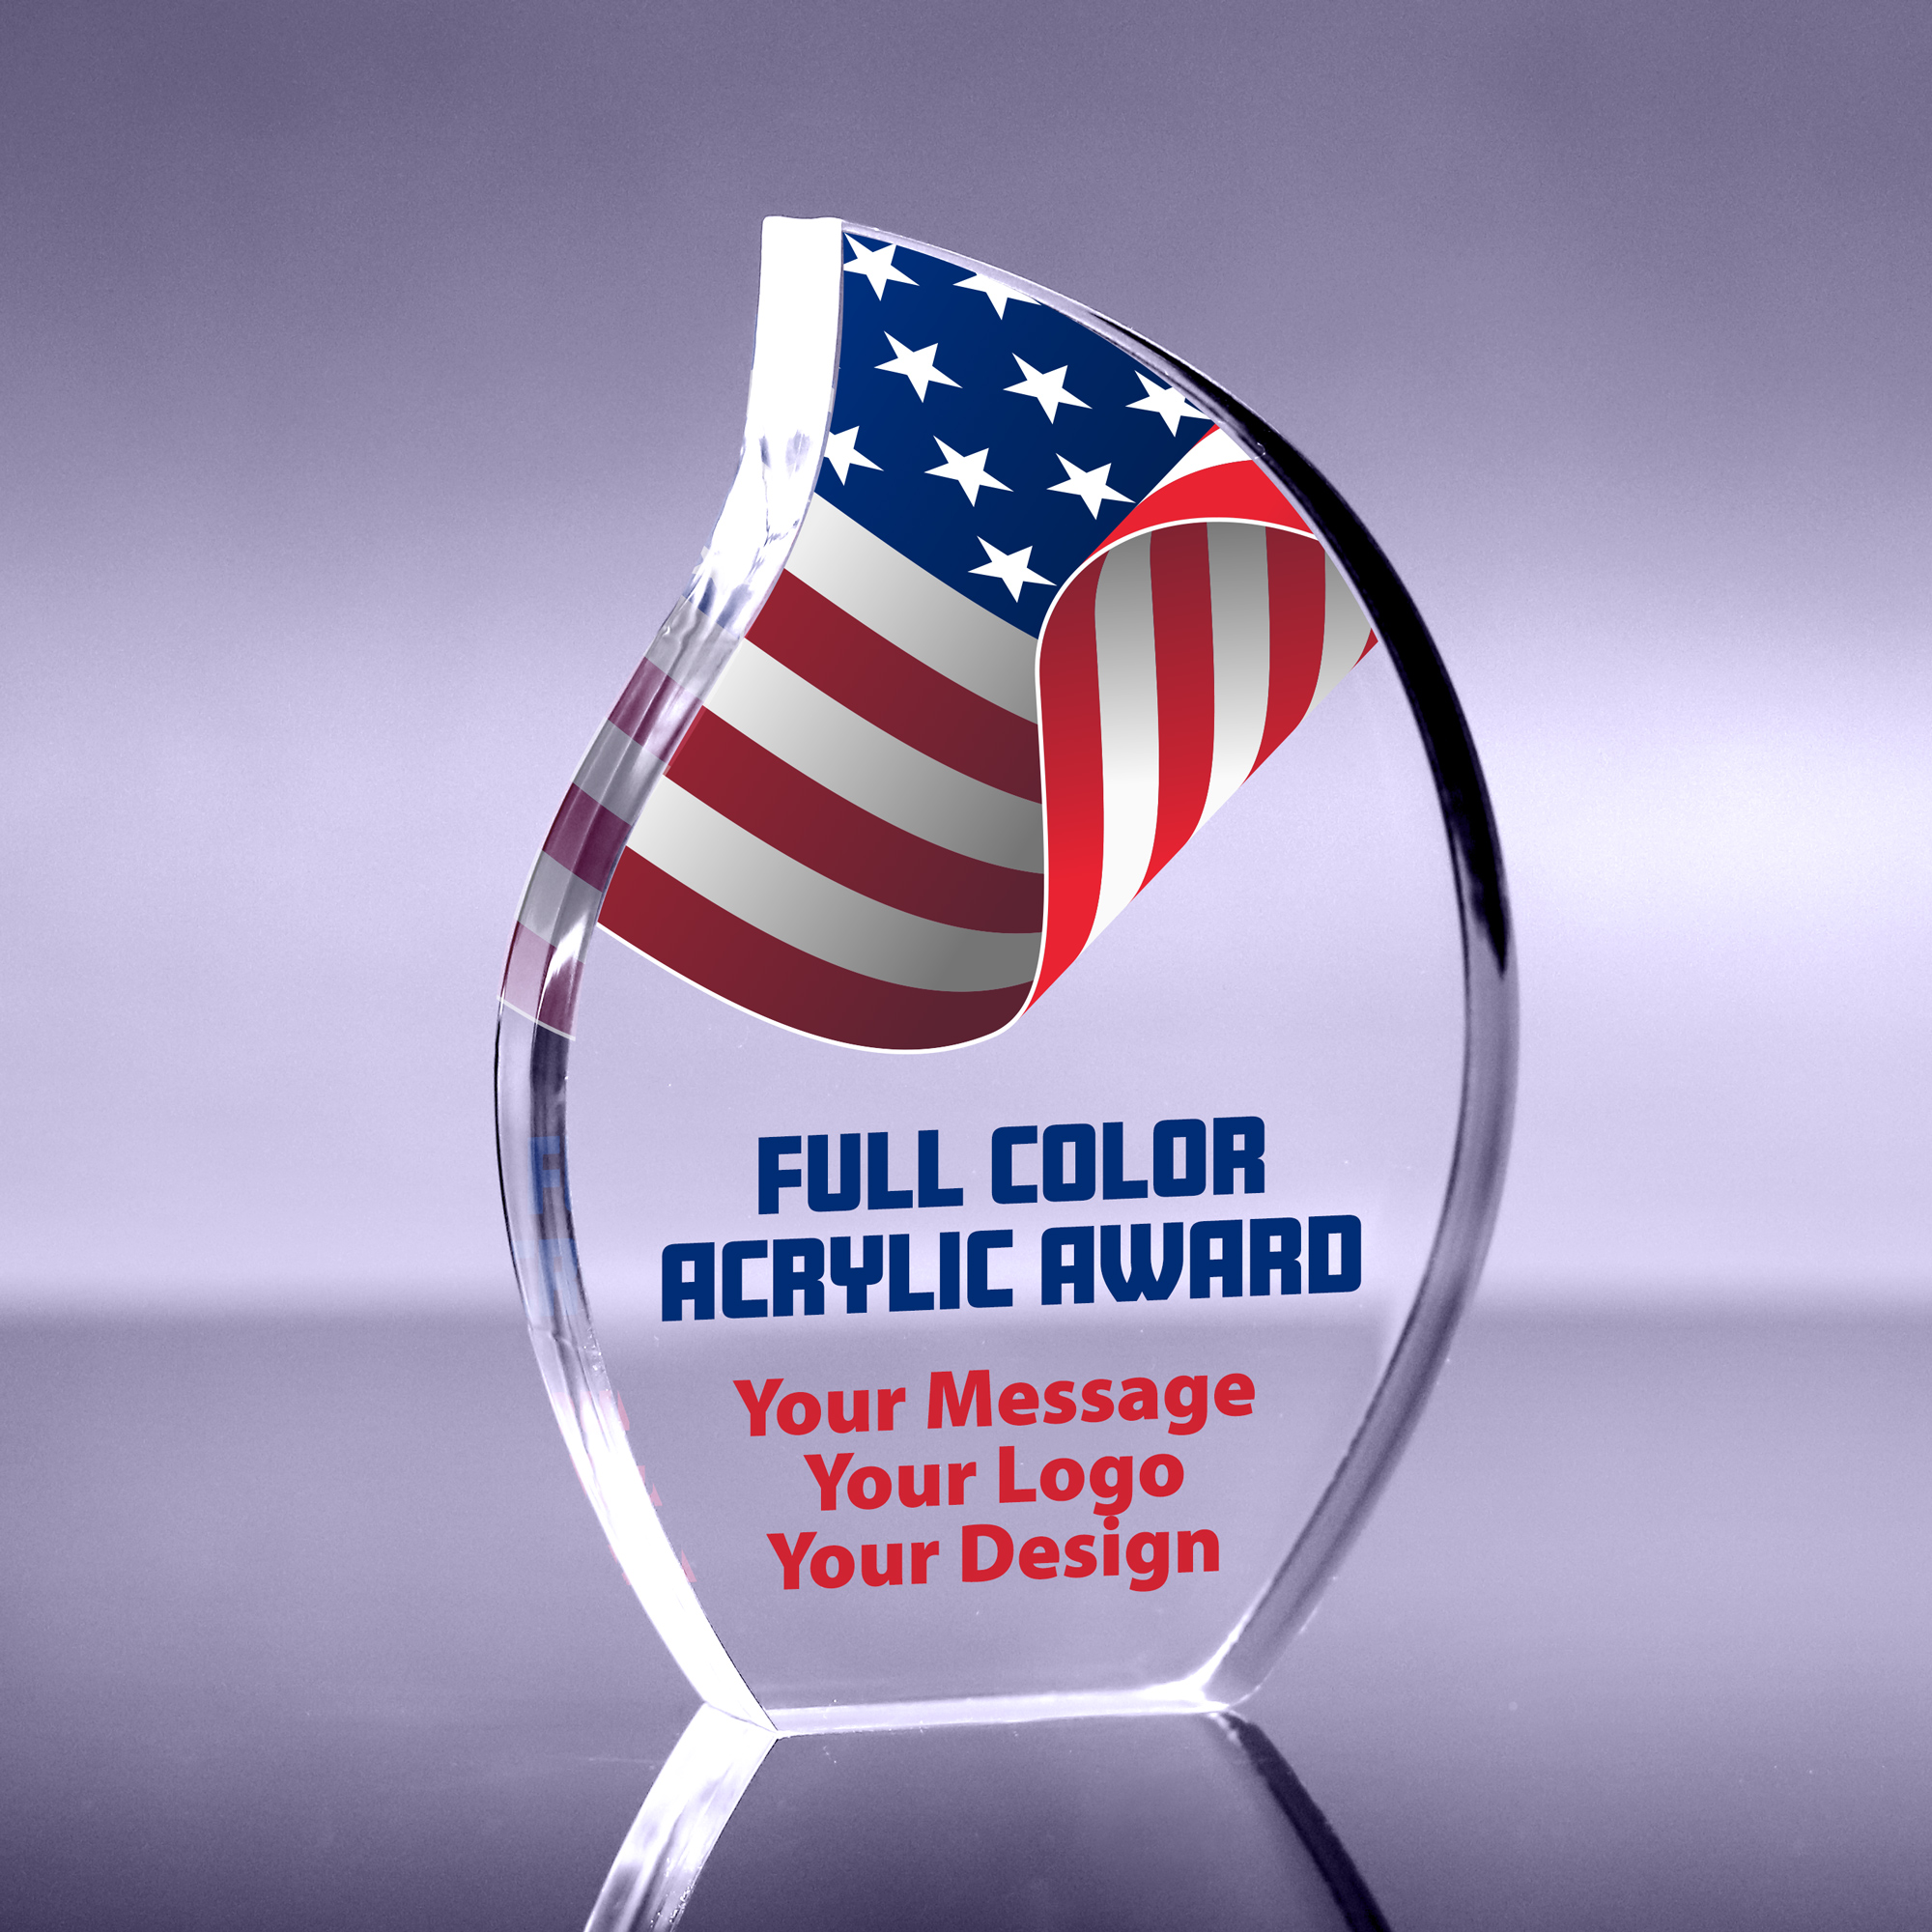 1 inch Thick Acrylic Flame Award - 6 inch Color